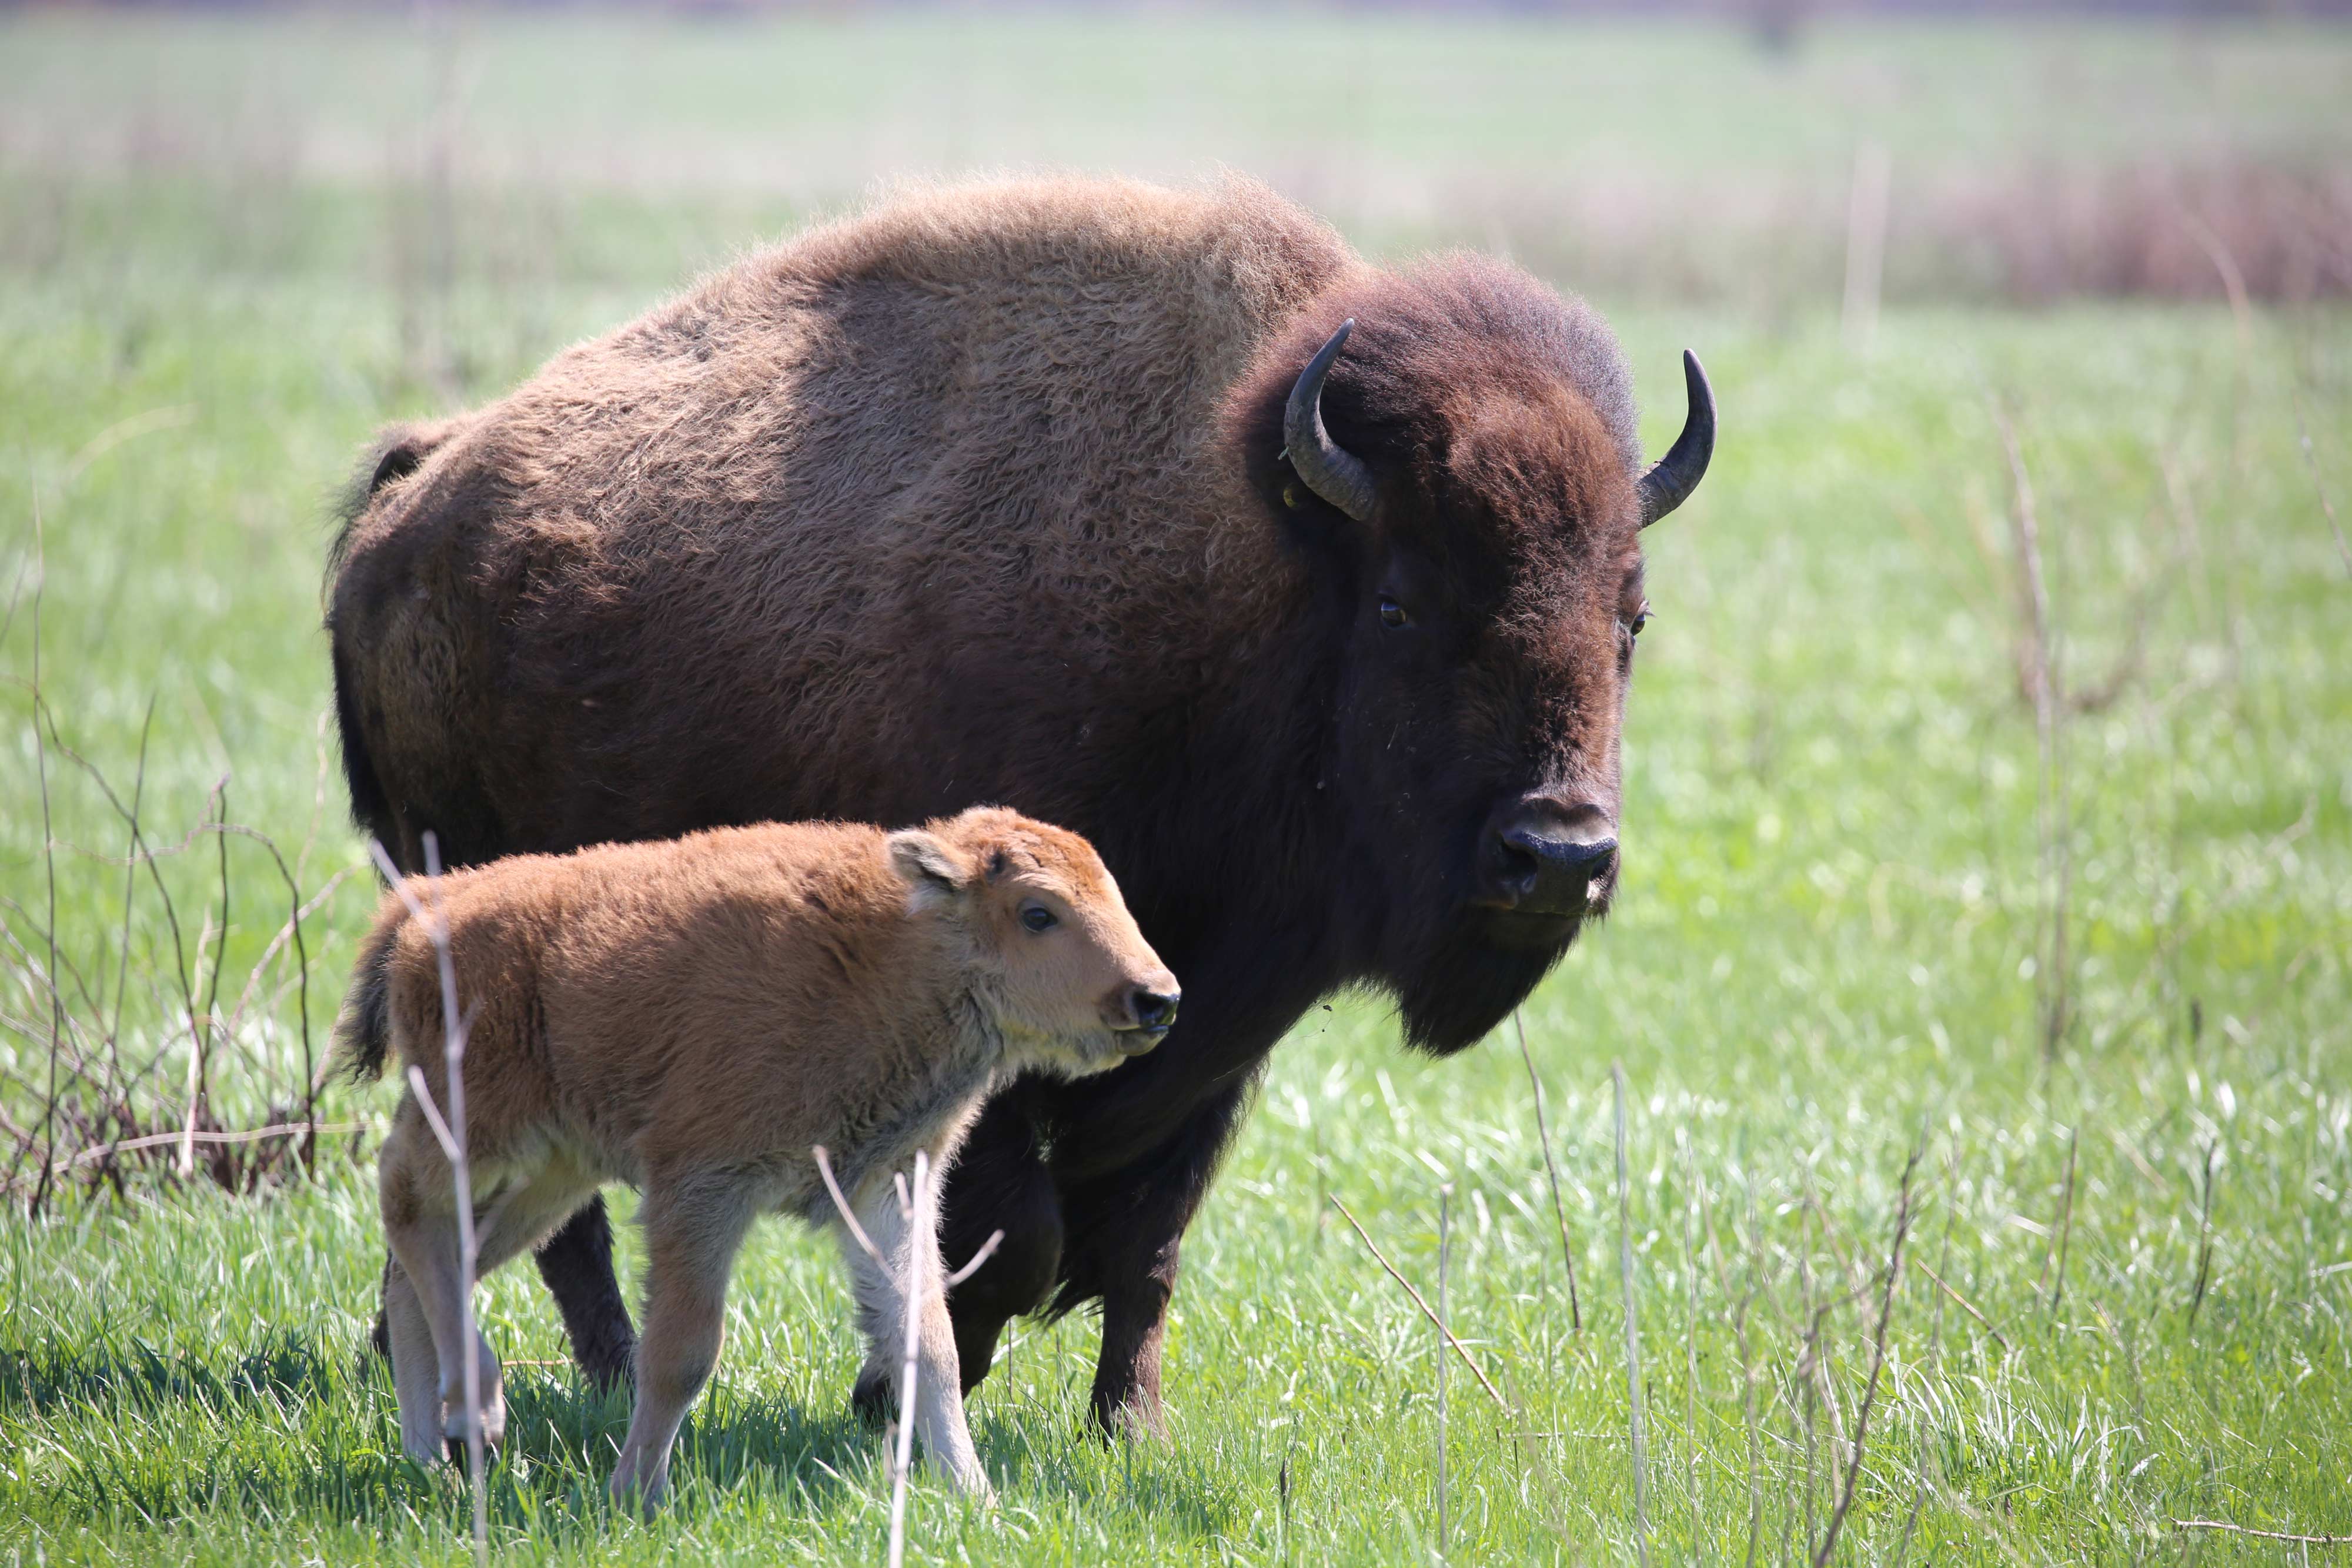 A bison and its calf walking in a field.